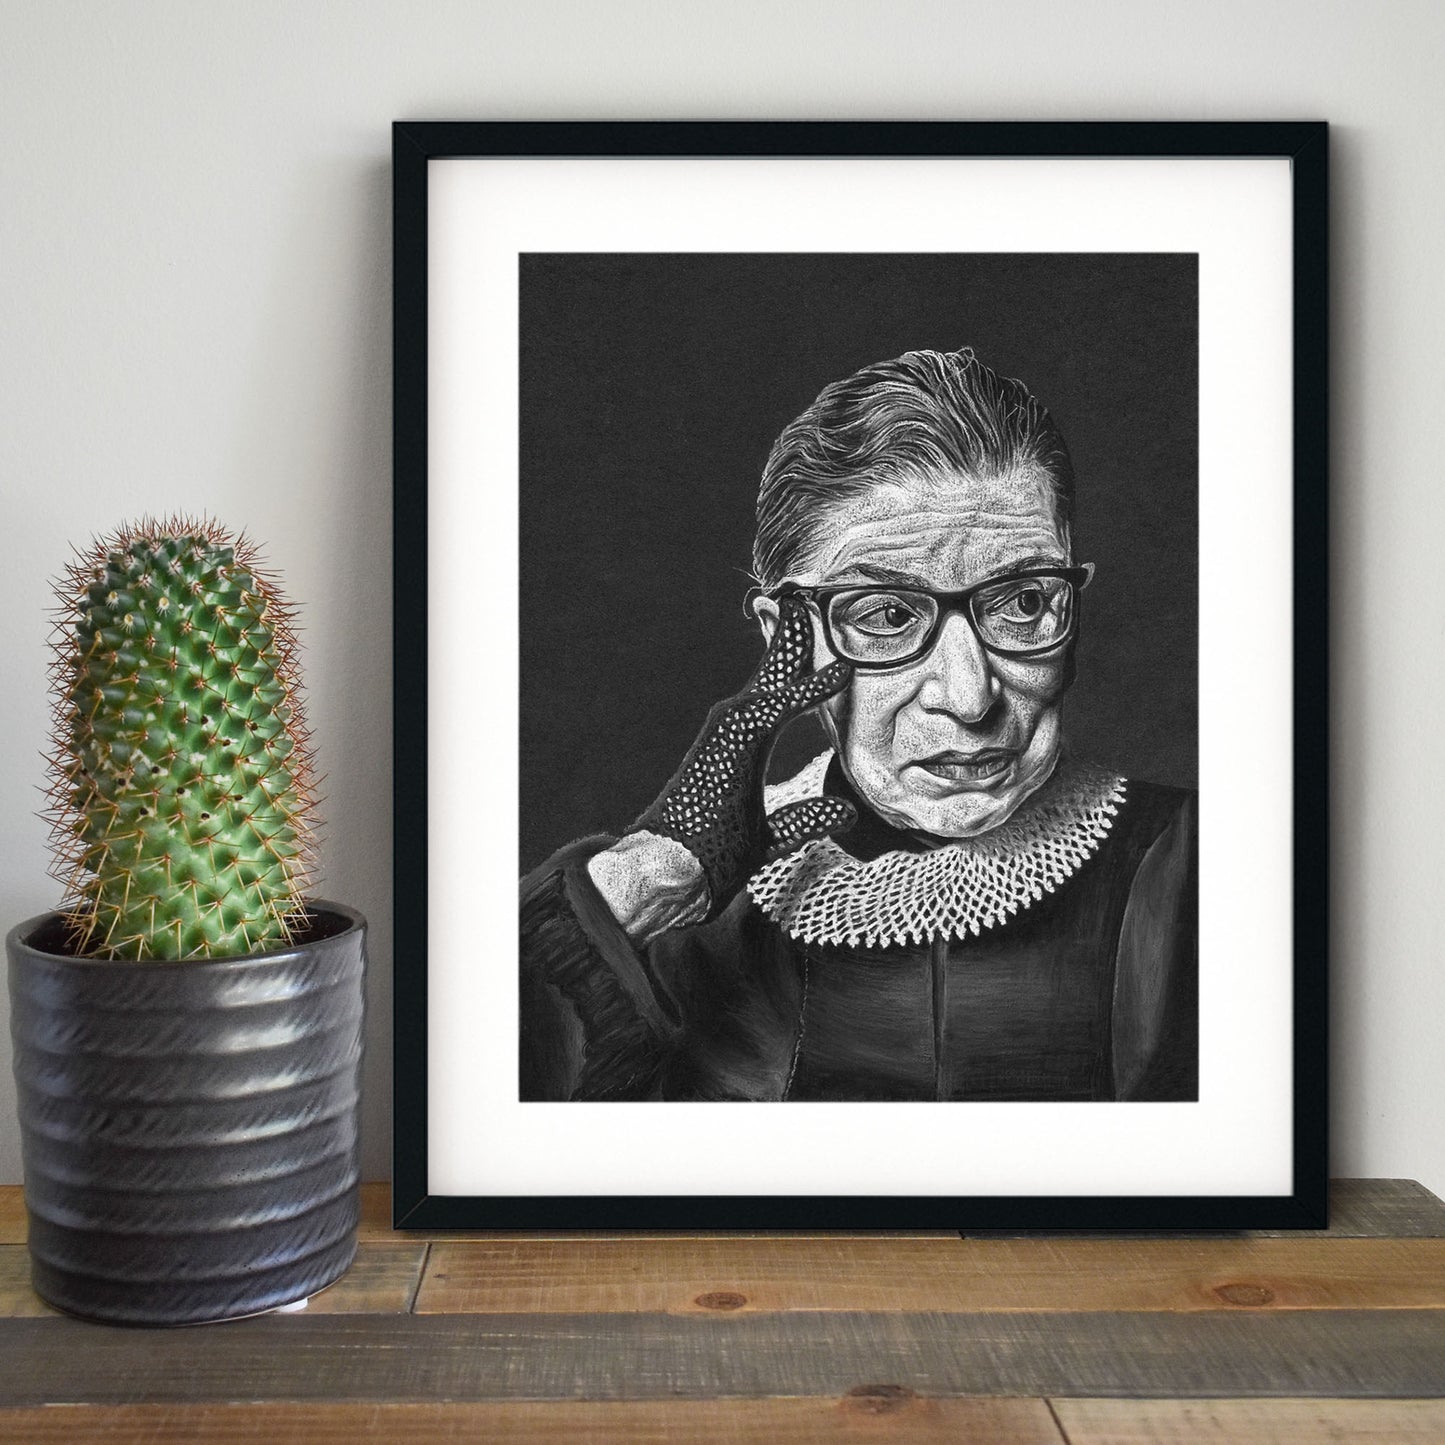 Ruth Bader Ginsburg art print, black frame with mat - Candid Almond